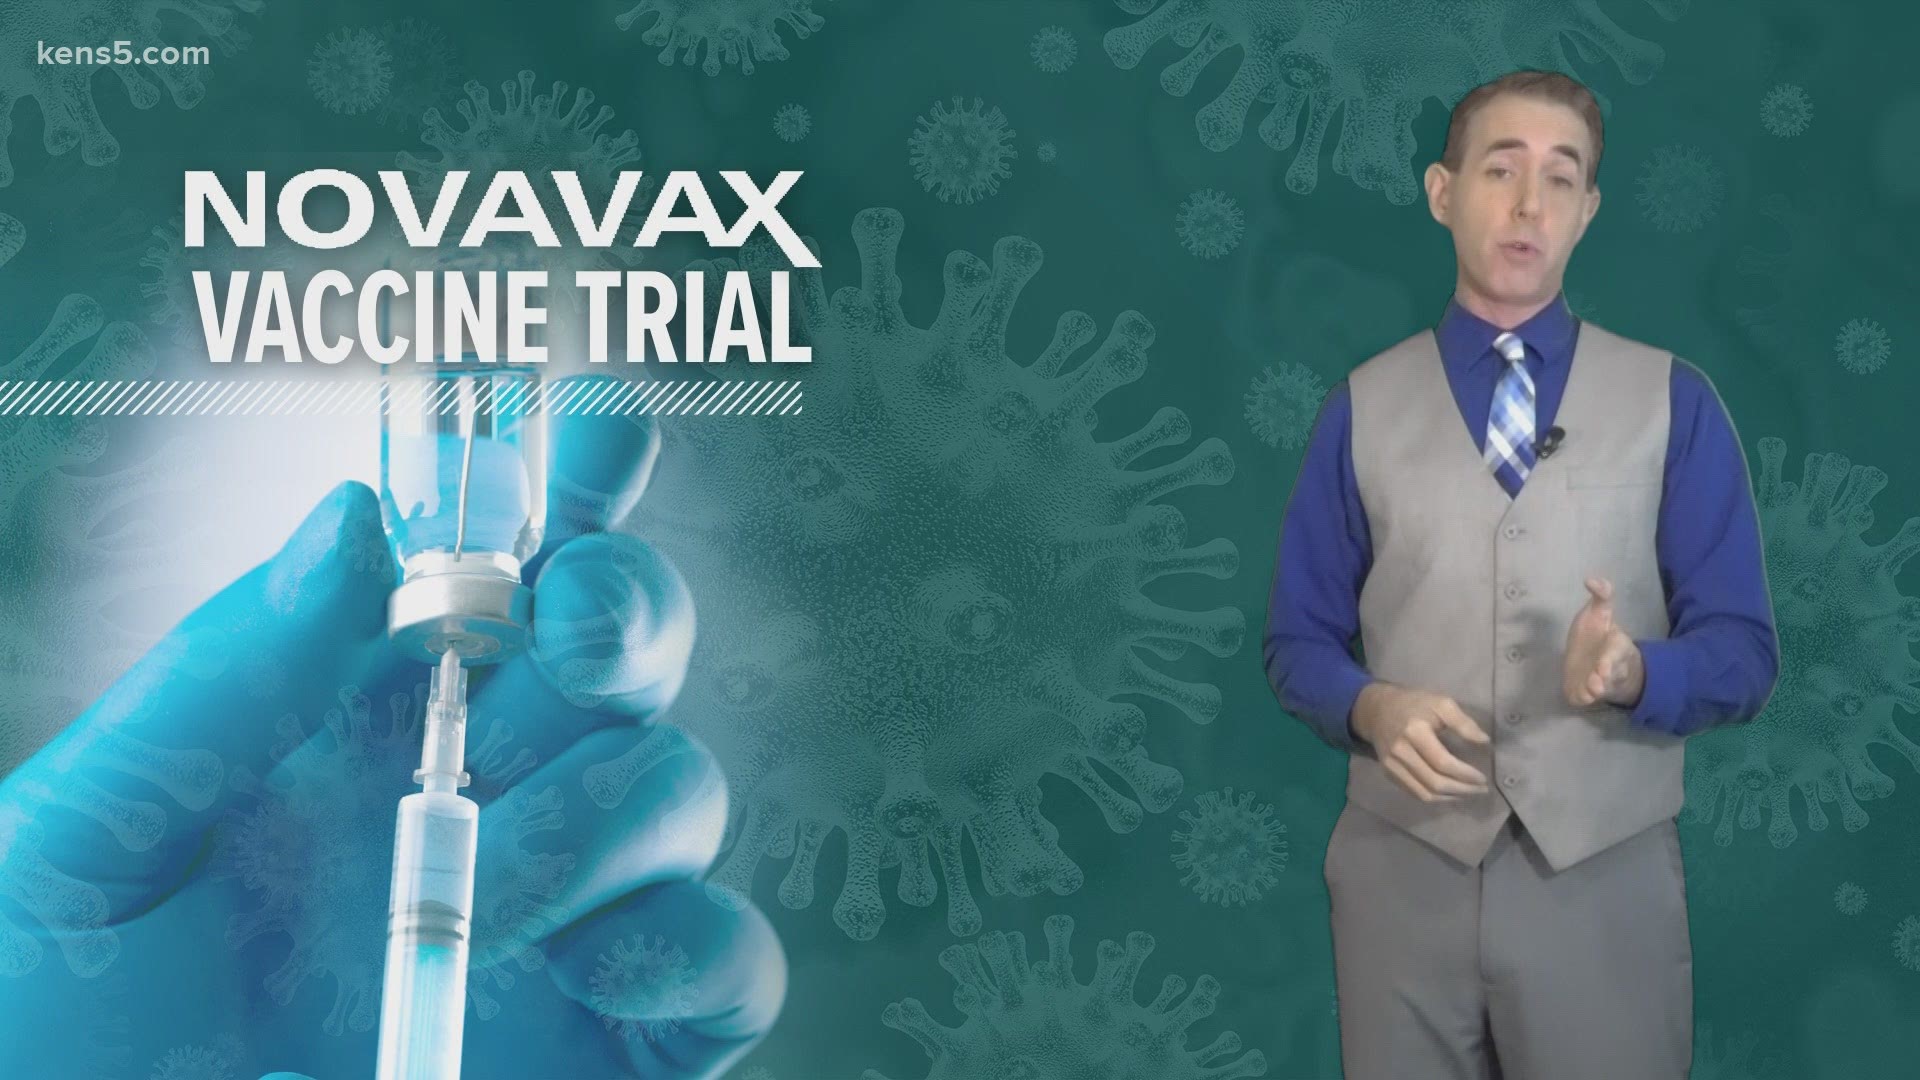 Novavax is vying for their vaccine candidate to become the next one granted emergency-use authorization by the FDA.